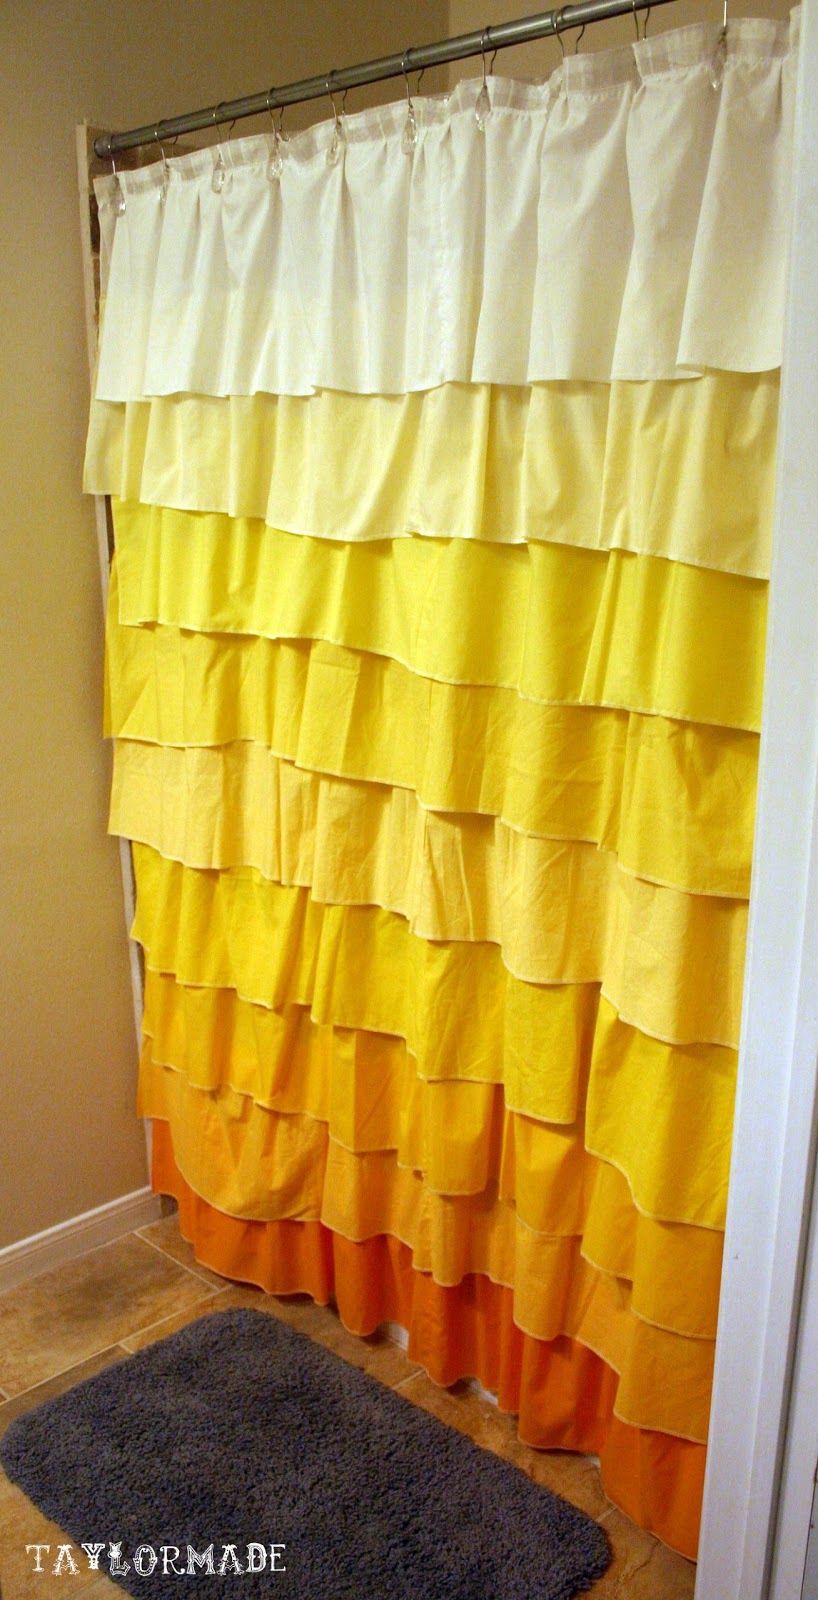 Ruffled-shower-curtain-with-a-bold-warm-ombre-